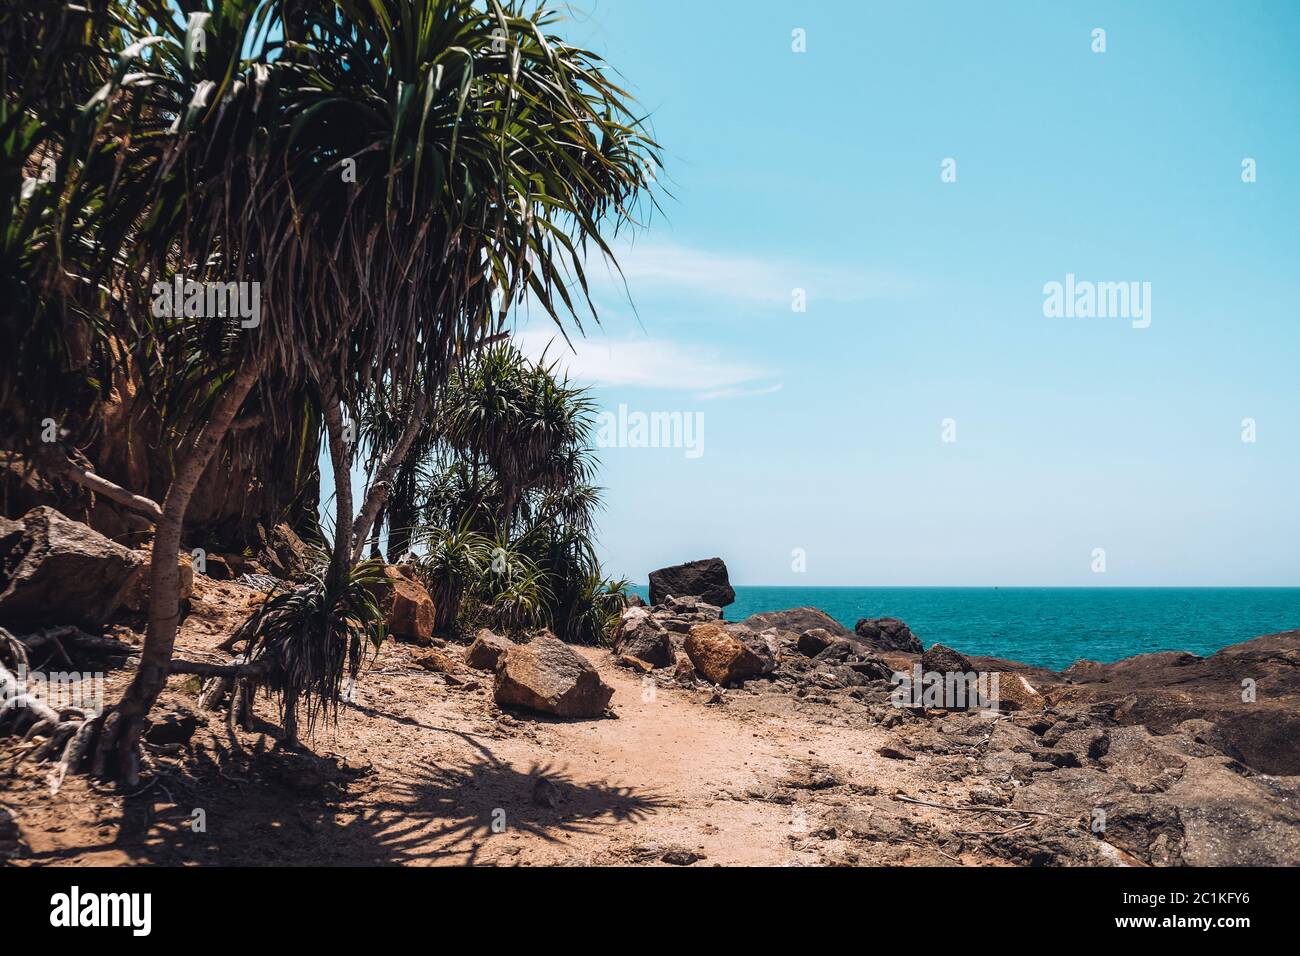 Wonderful view from the secluded tropical beach in Sri Lanka. Unknown destination with nobody around. Isolated spot with trees, rocks and ocean Stock Photo